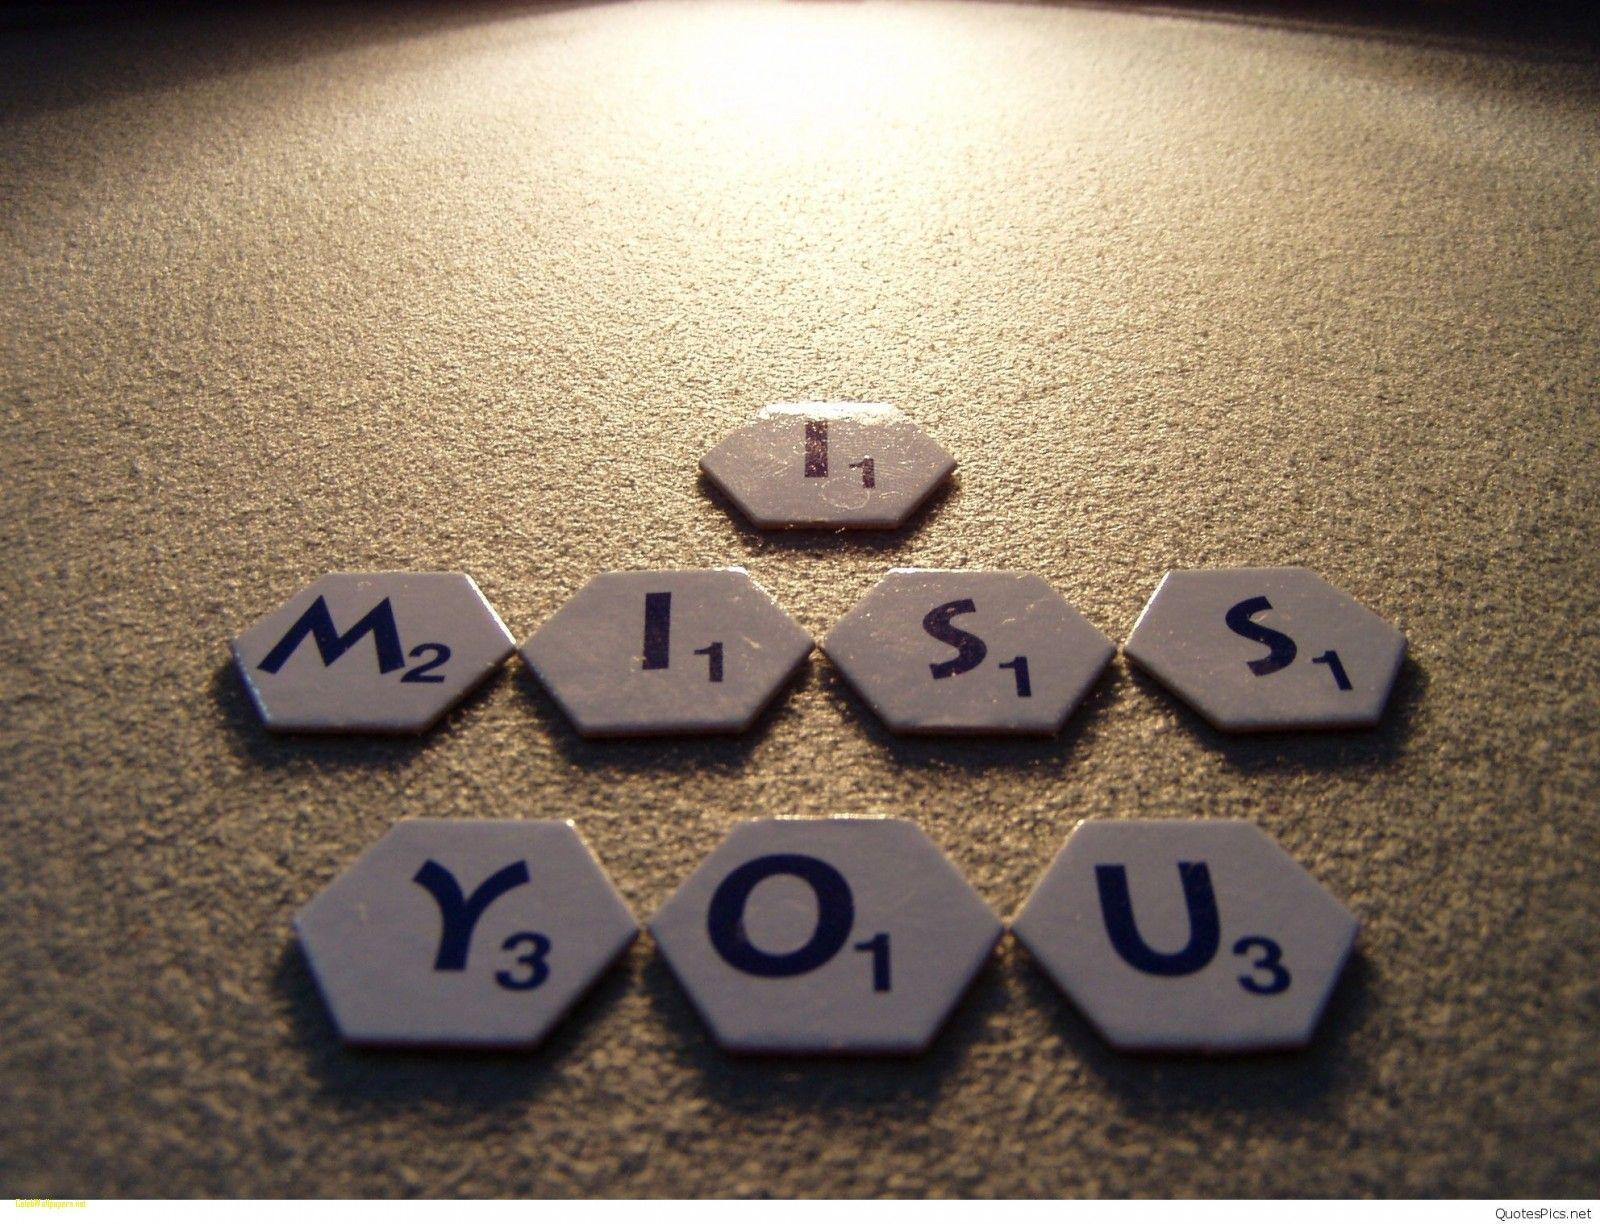 Hd I Miss You Wallpaper Sayings for Him or Her Awesome I Miss You